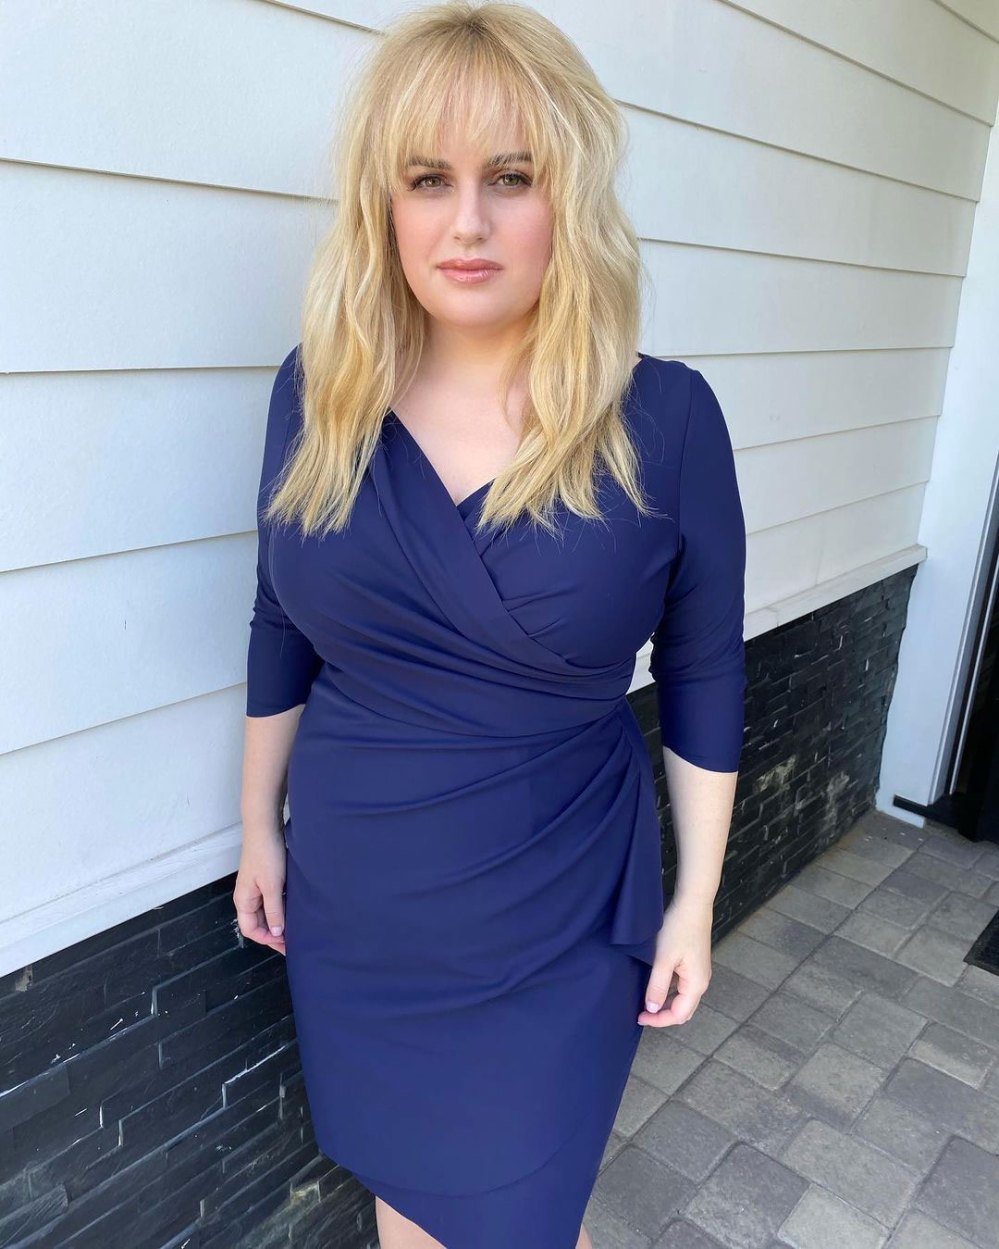 Rebel Wilson Explains How People Treat Her Differently After 61-Pound Weight Loss